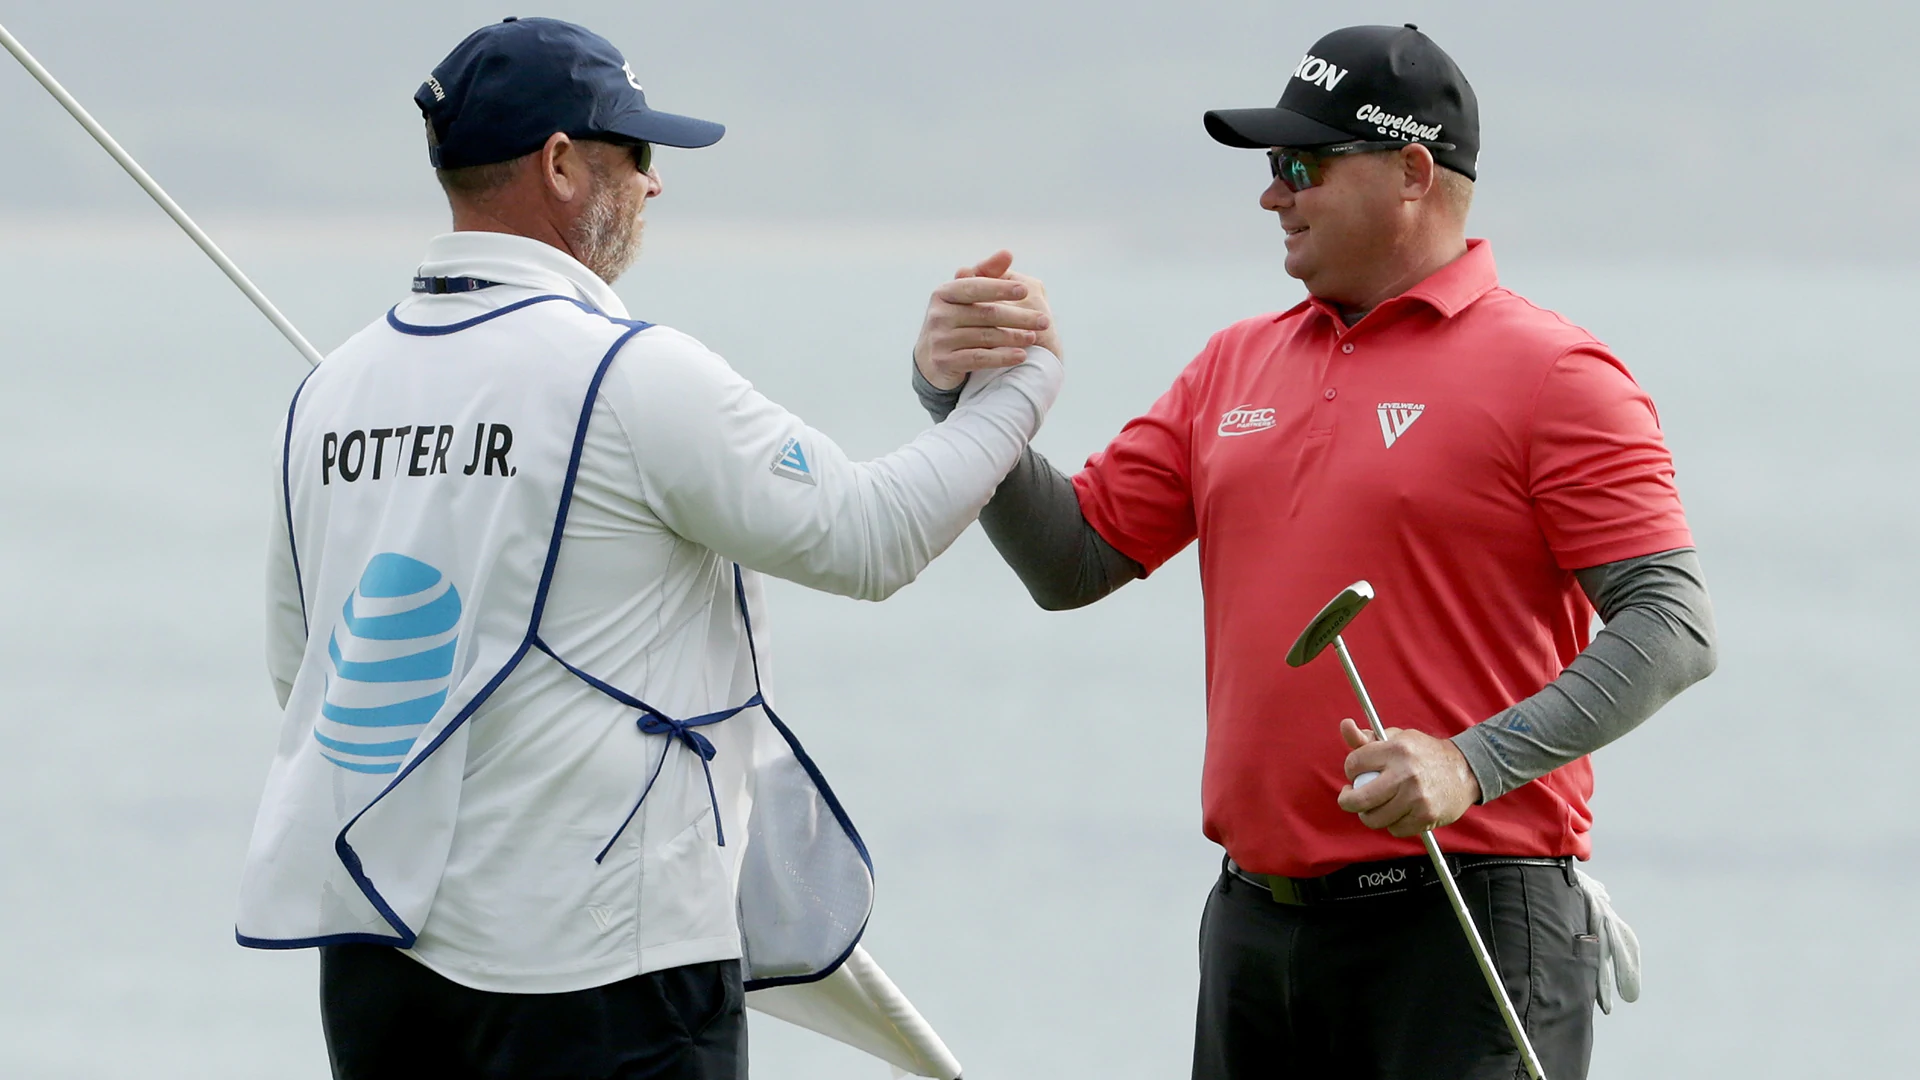 Potter holds off big names for Pebble Beach victory